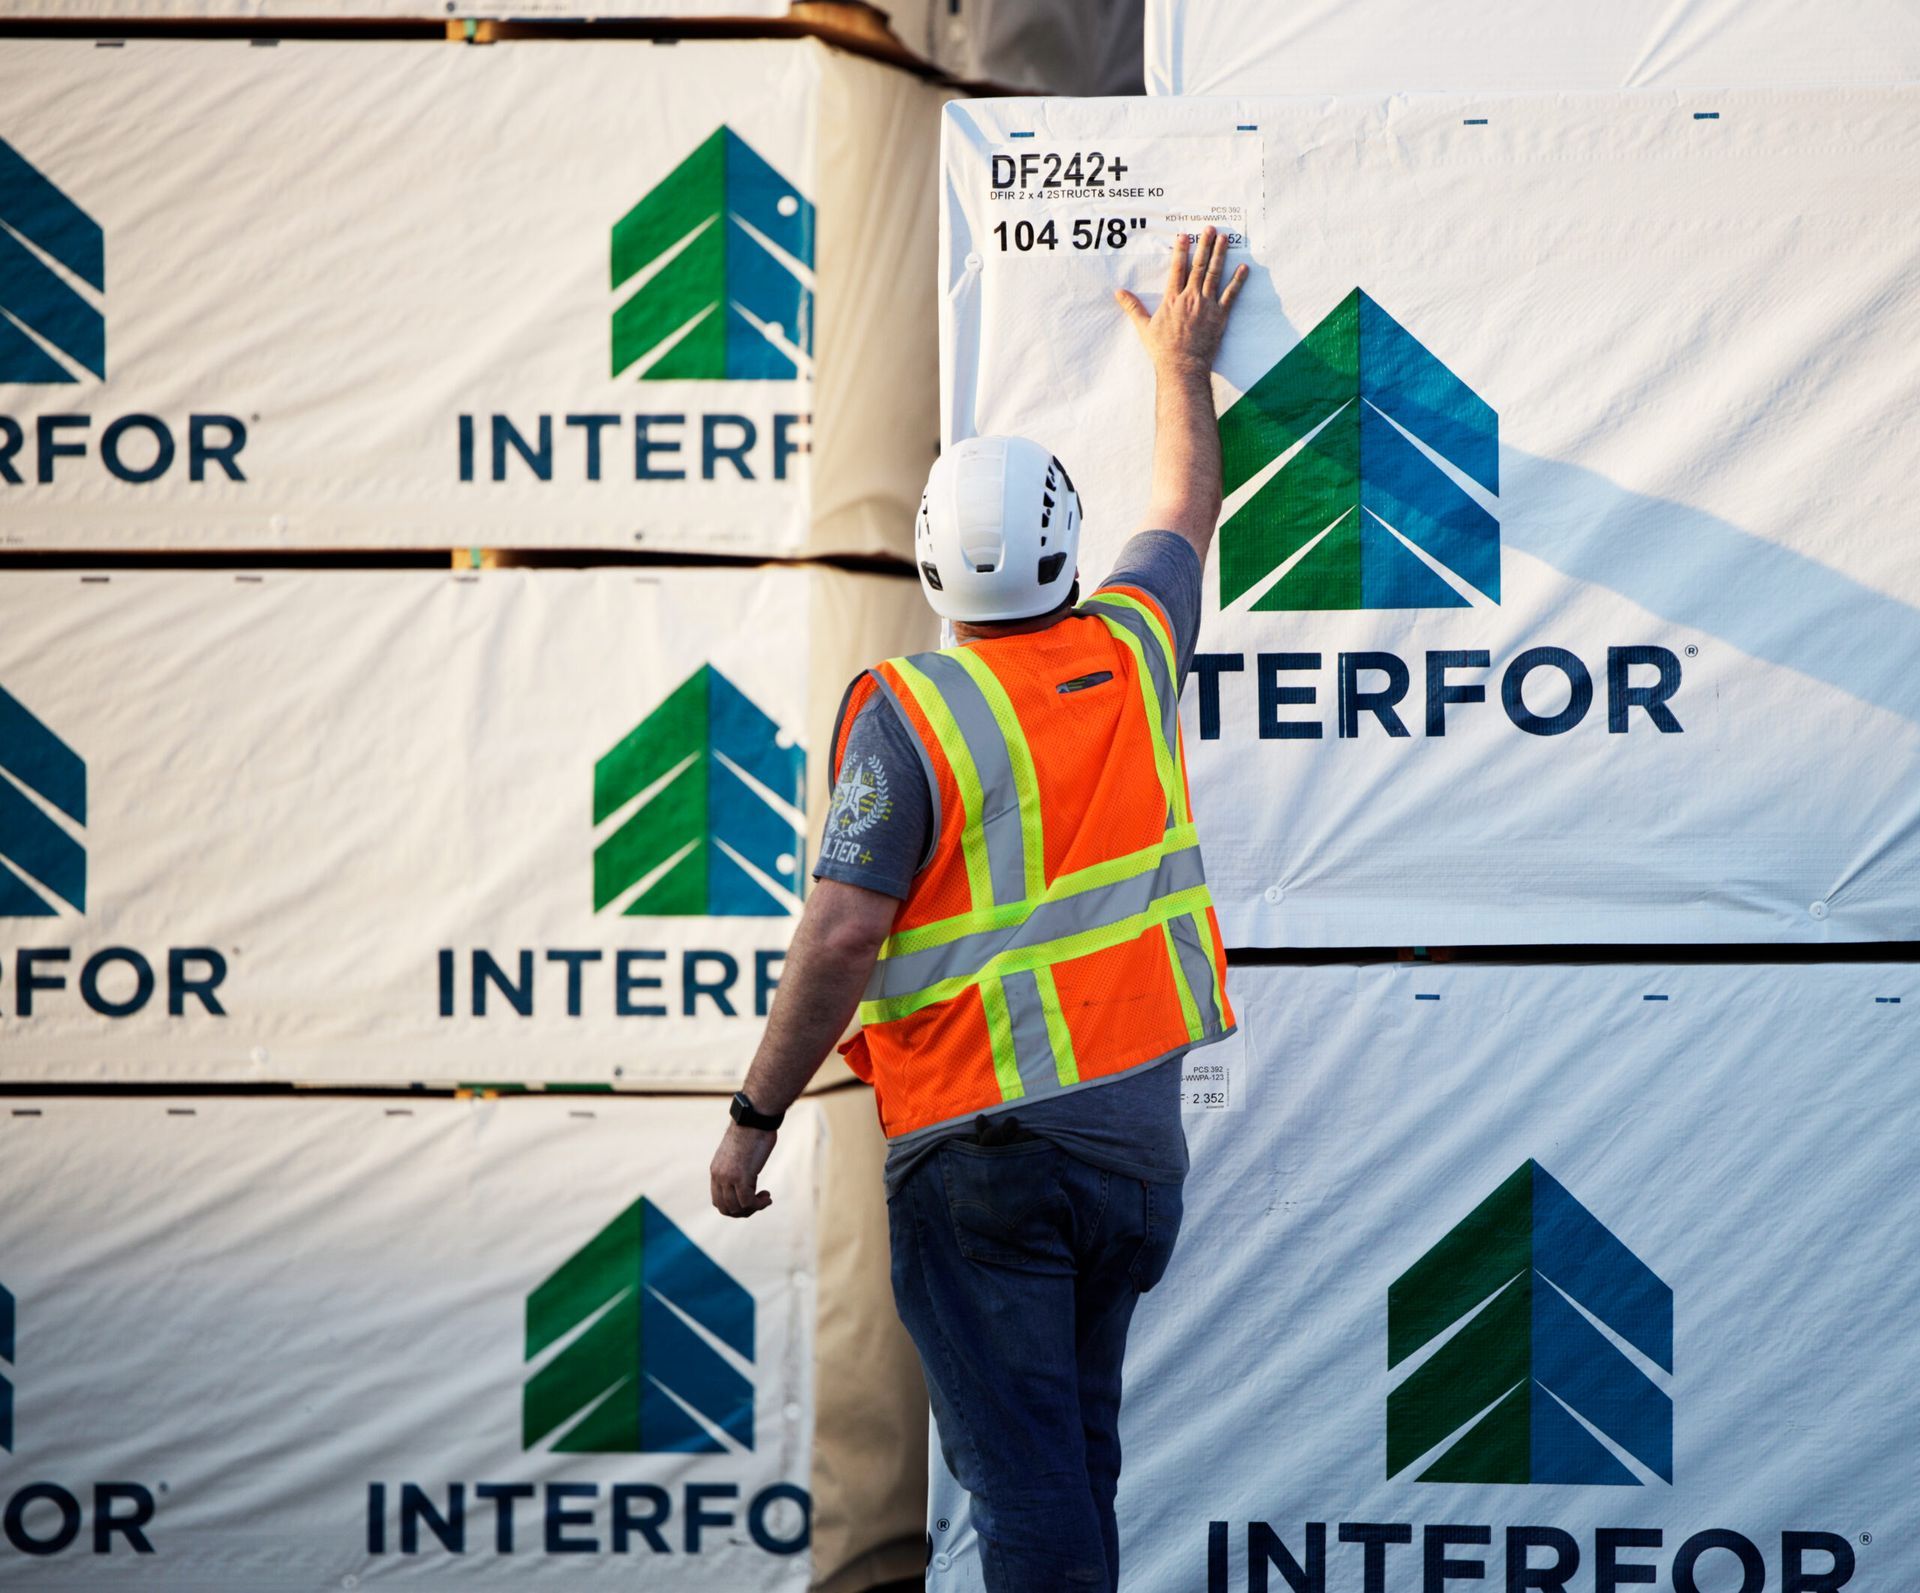 Man stood by an Interfor logo